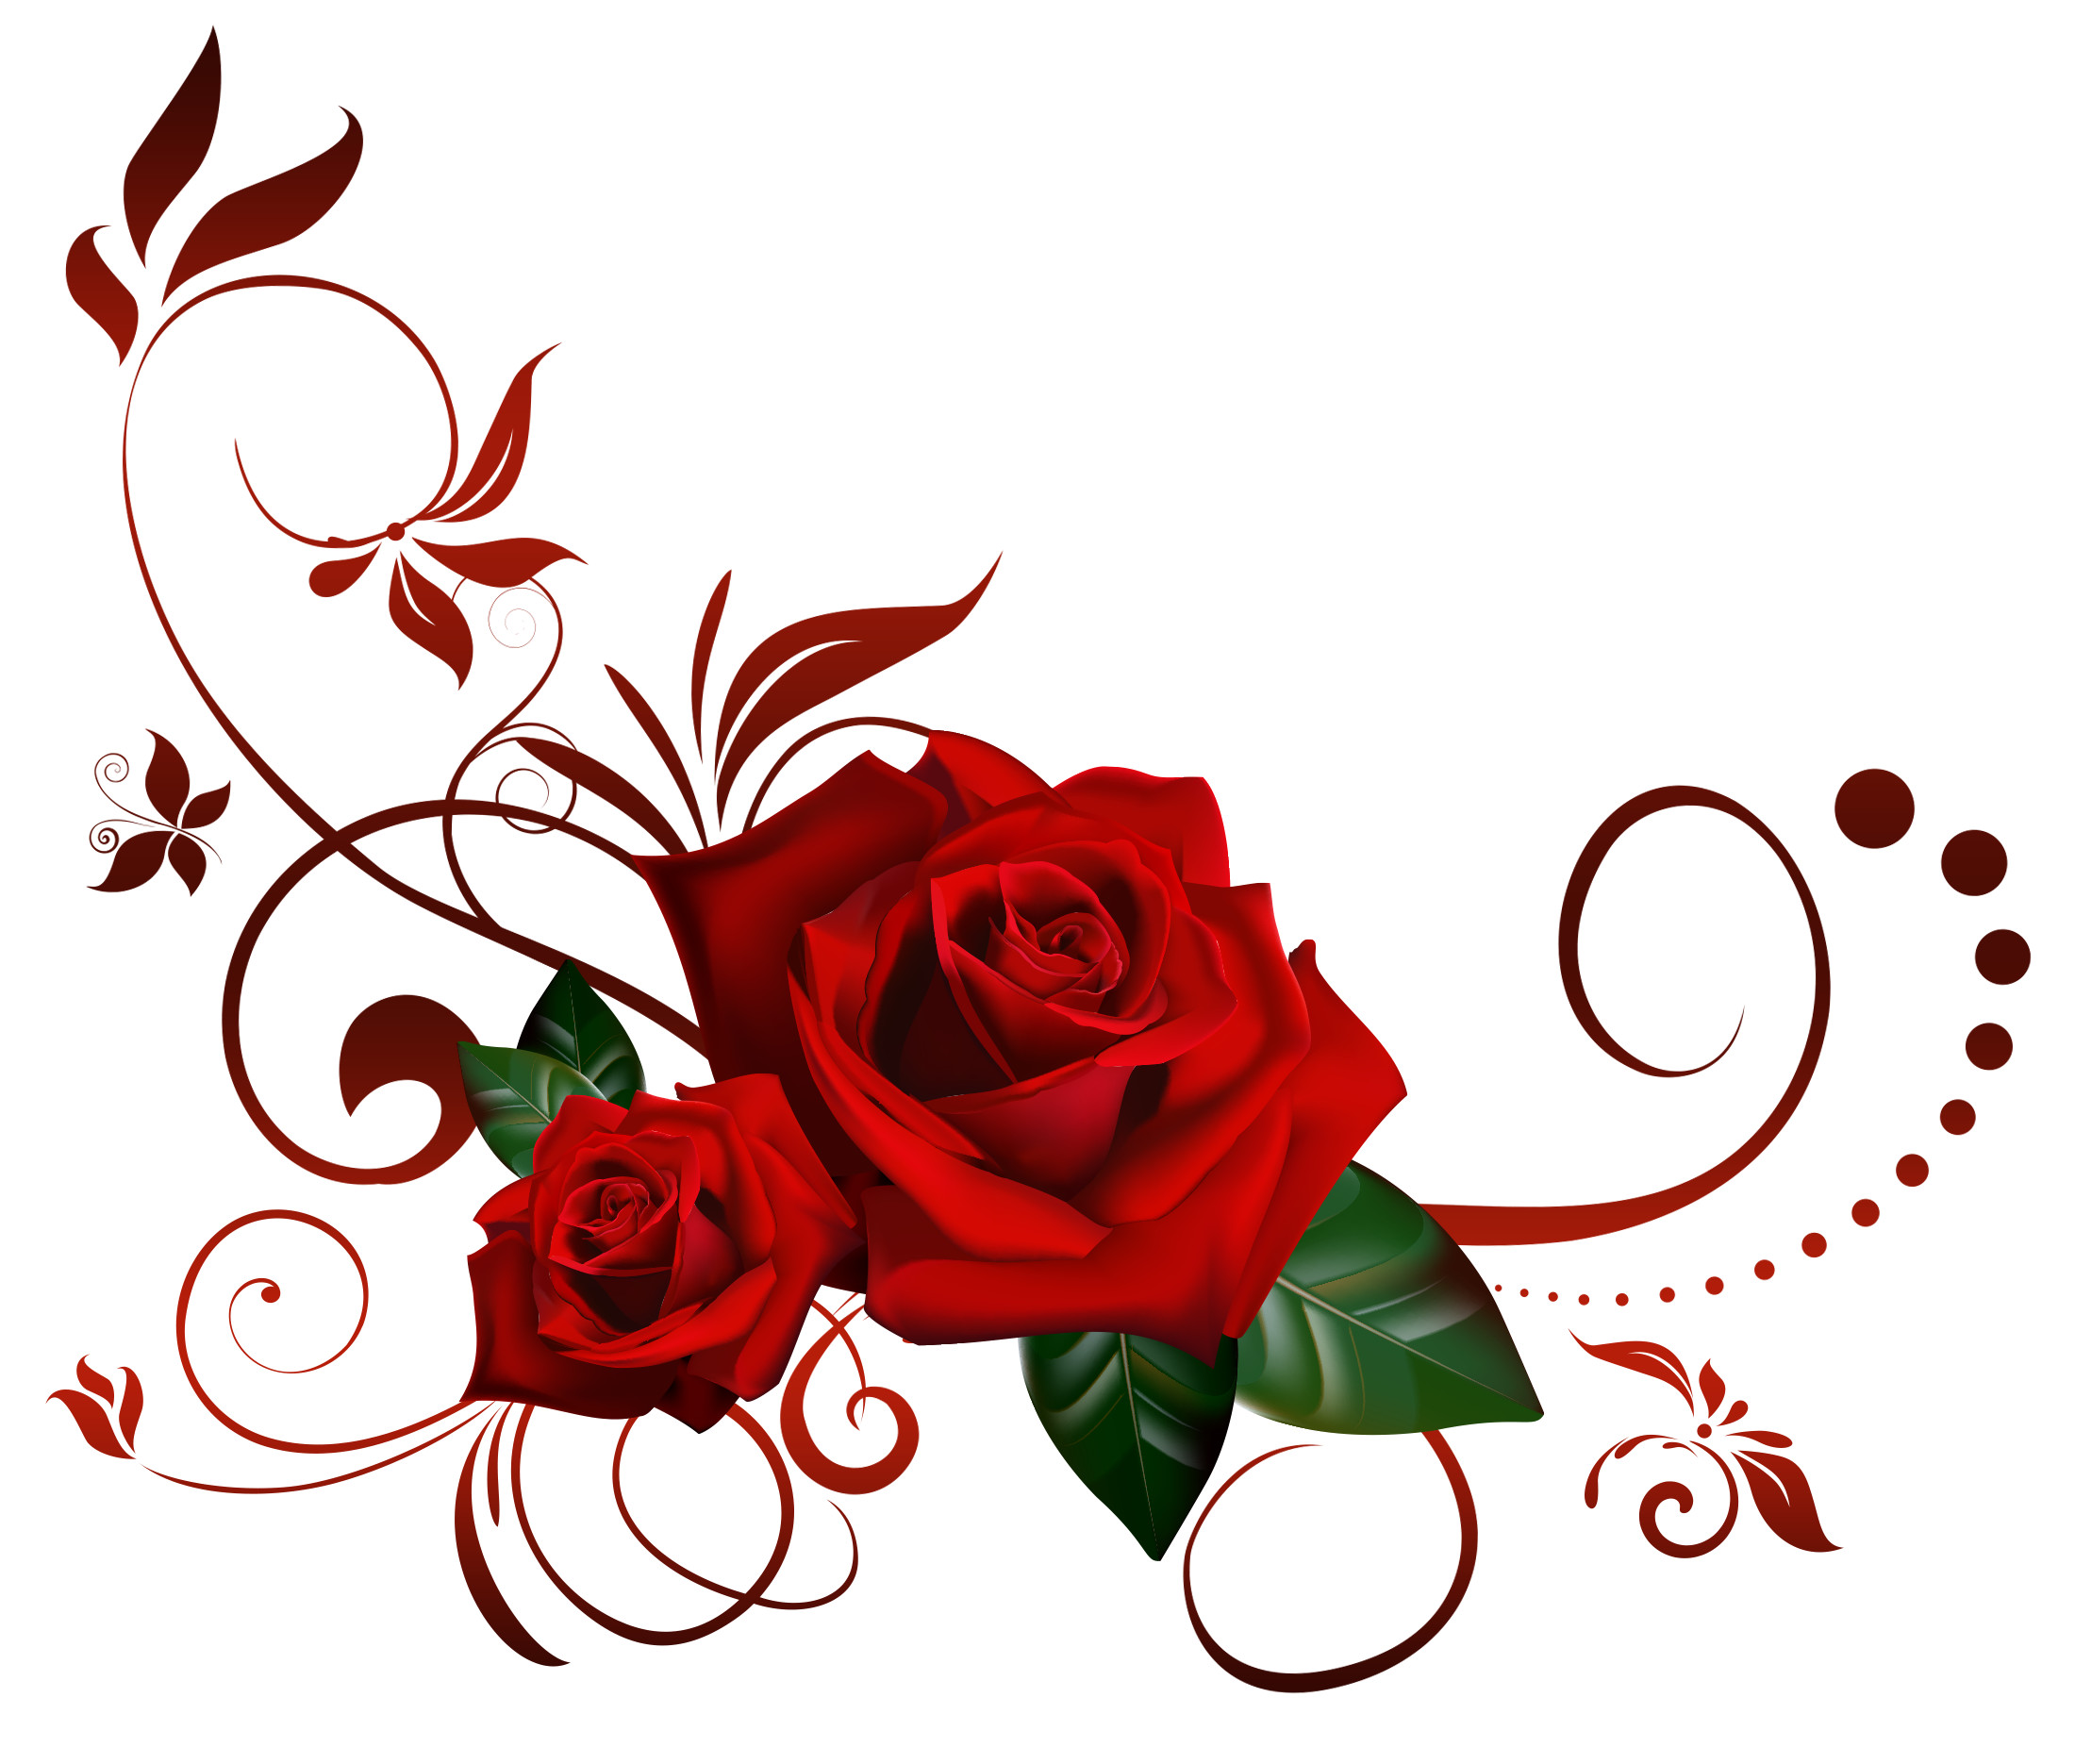 2200x1870 Red rose with leaf PNG image Resolution: 2200 x 1870. Size : 3599 kb.  Format: PNG Transparent